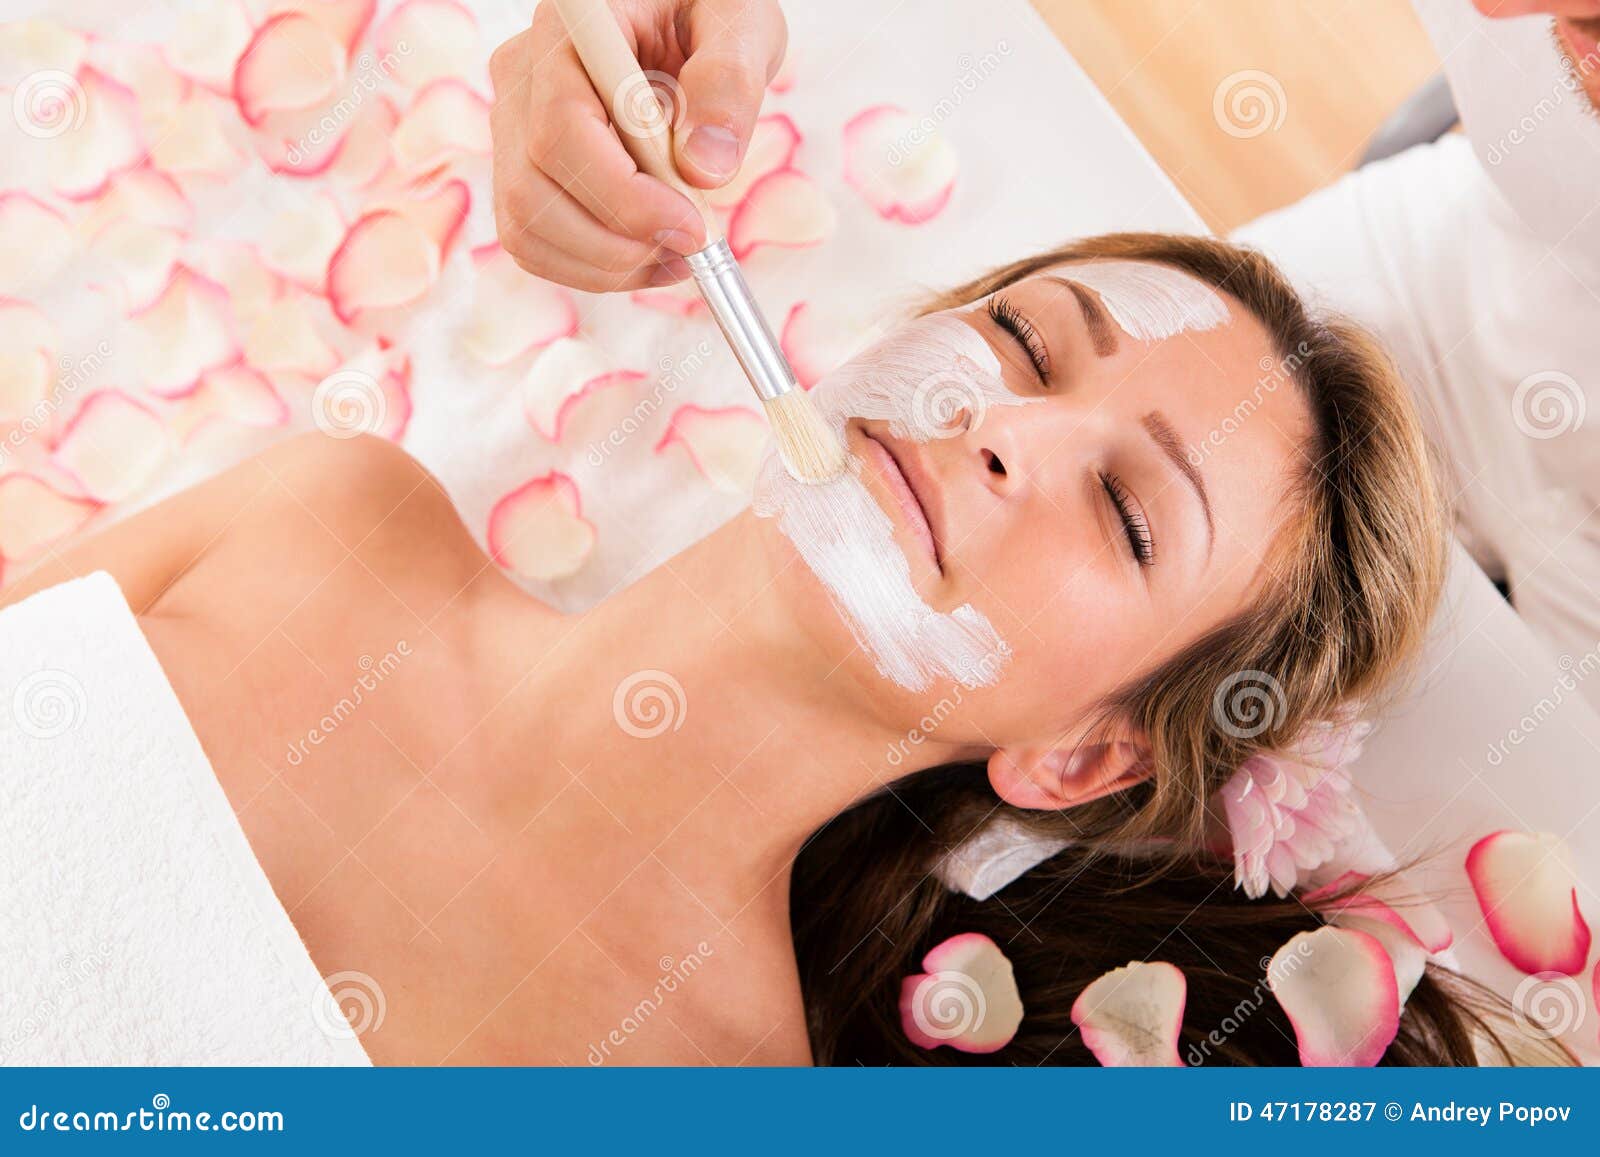 beautician applying a face mask